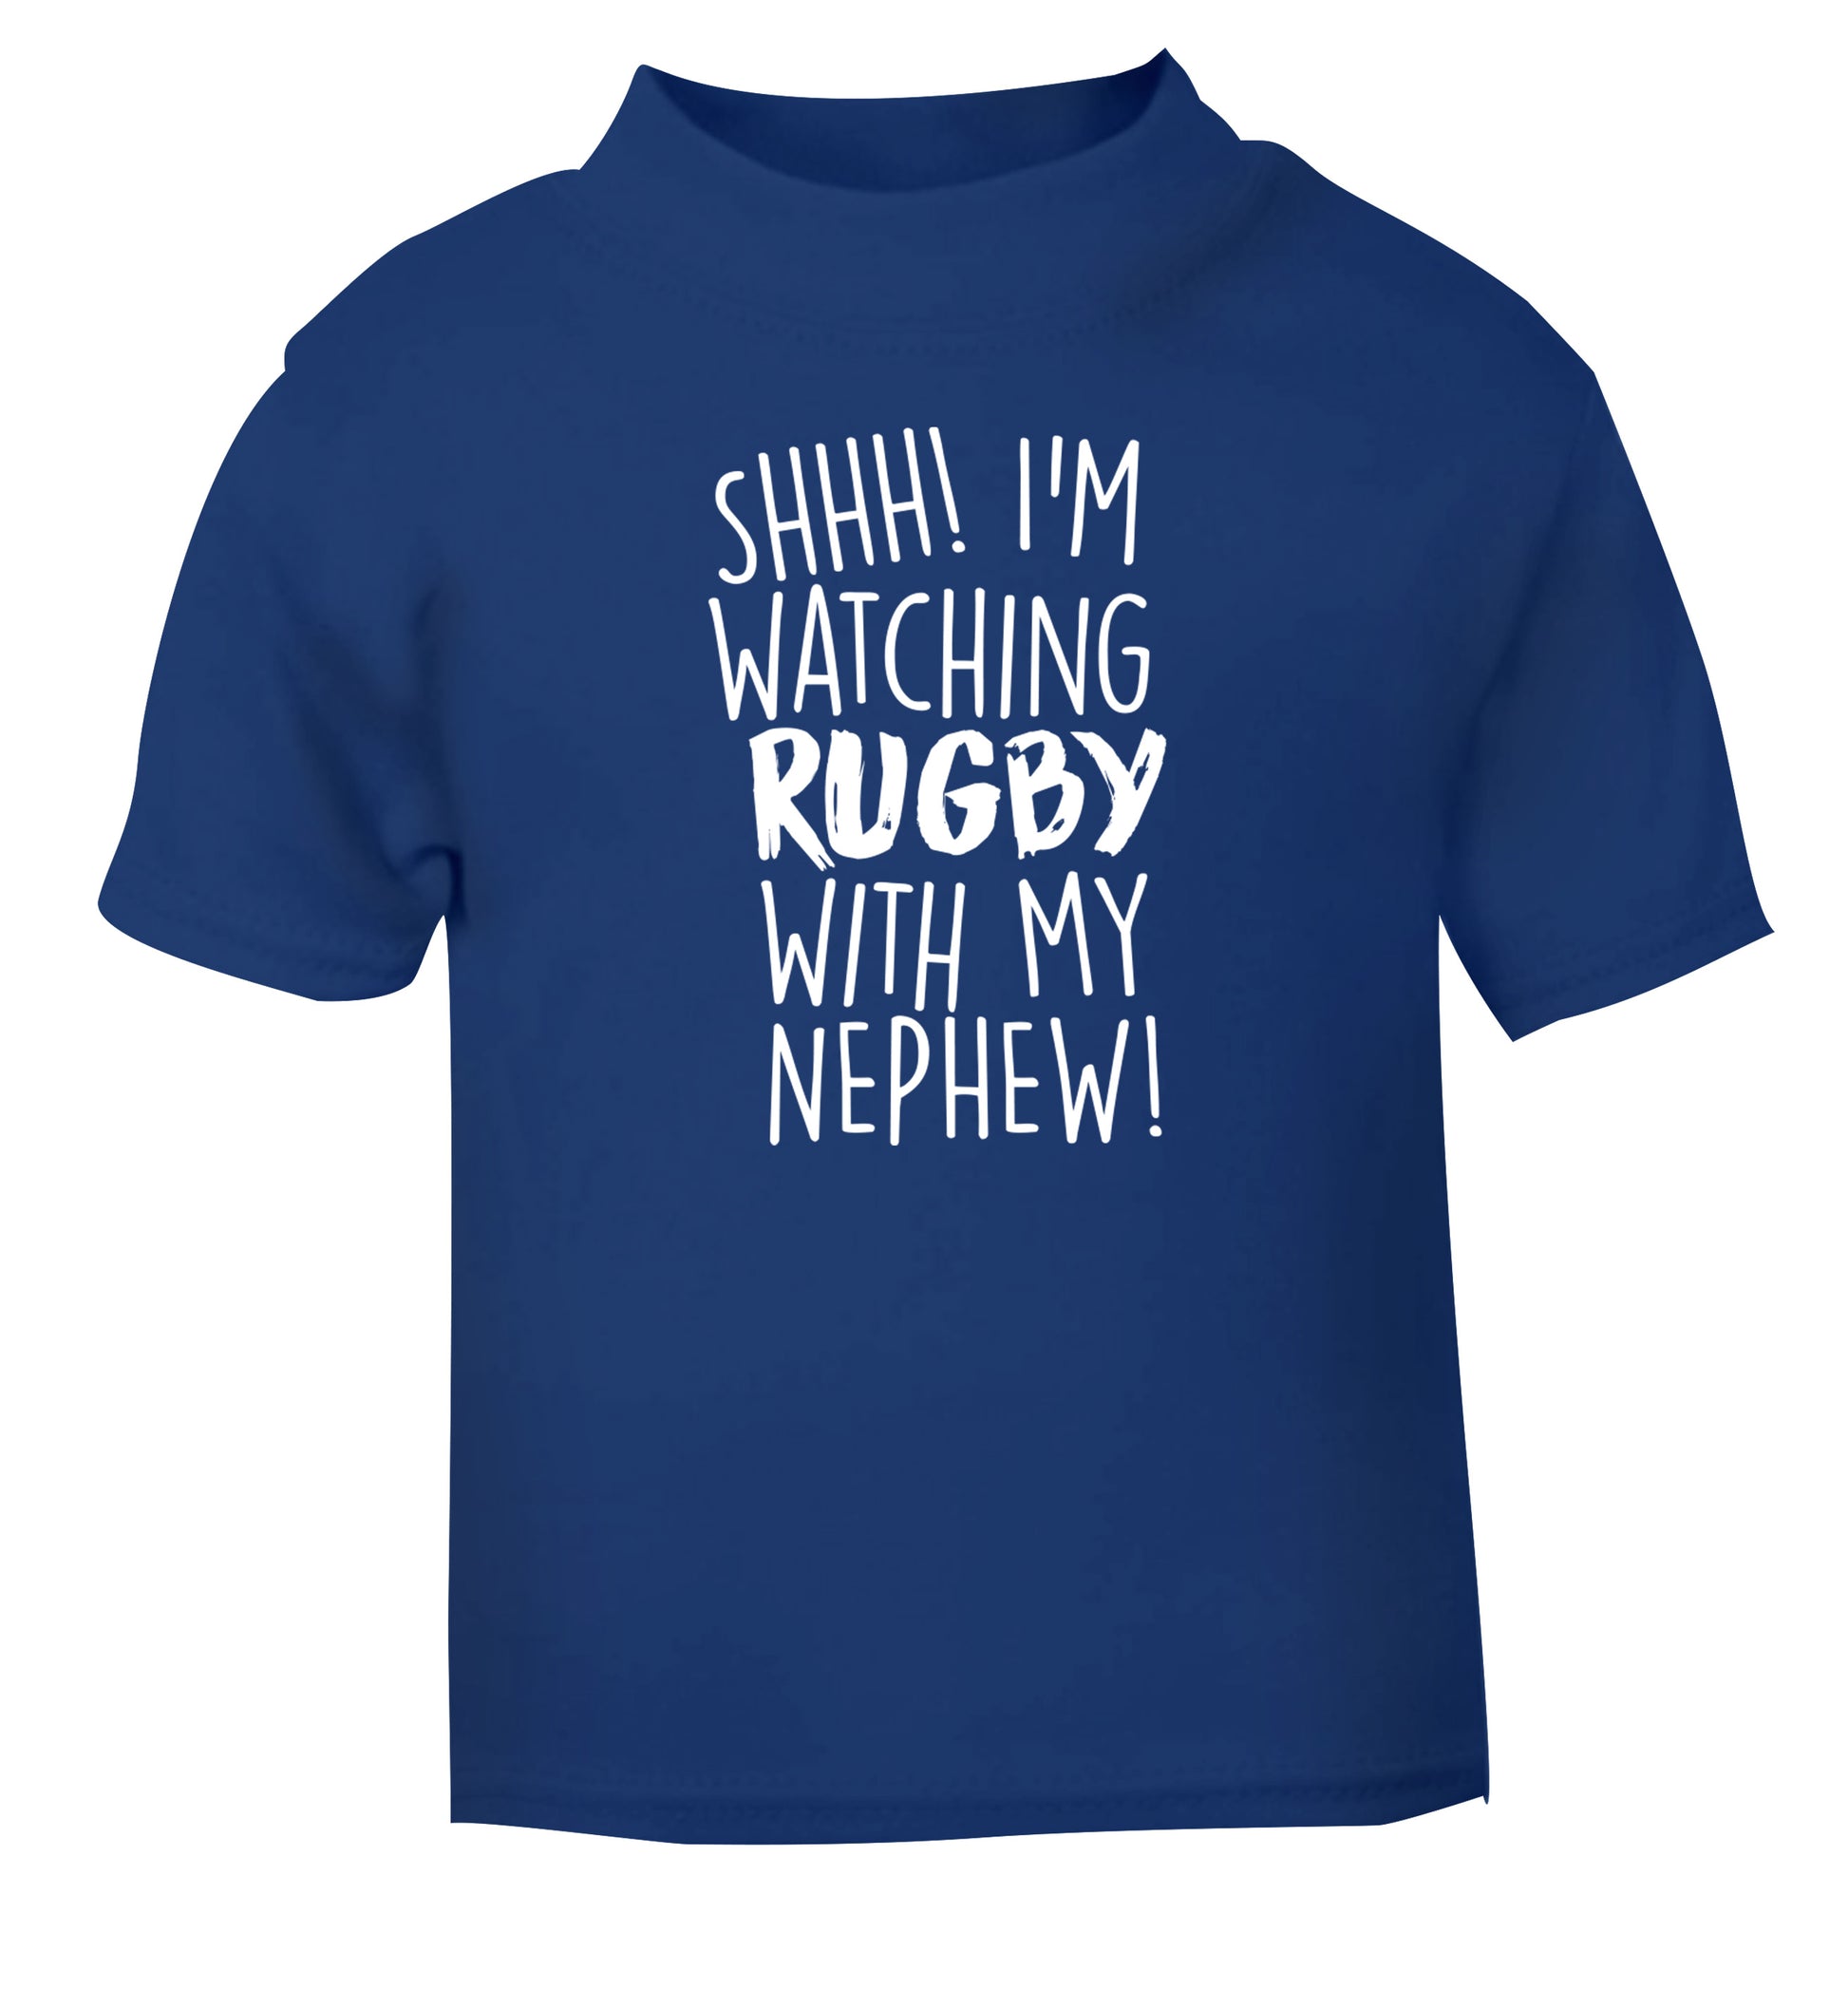 Shh.. I'm watching rugby with my nephew blue Baby Toddler Tshirt 2 Years